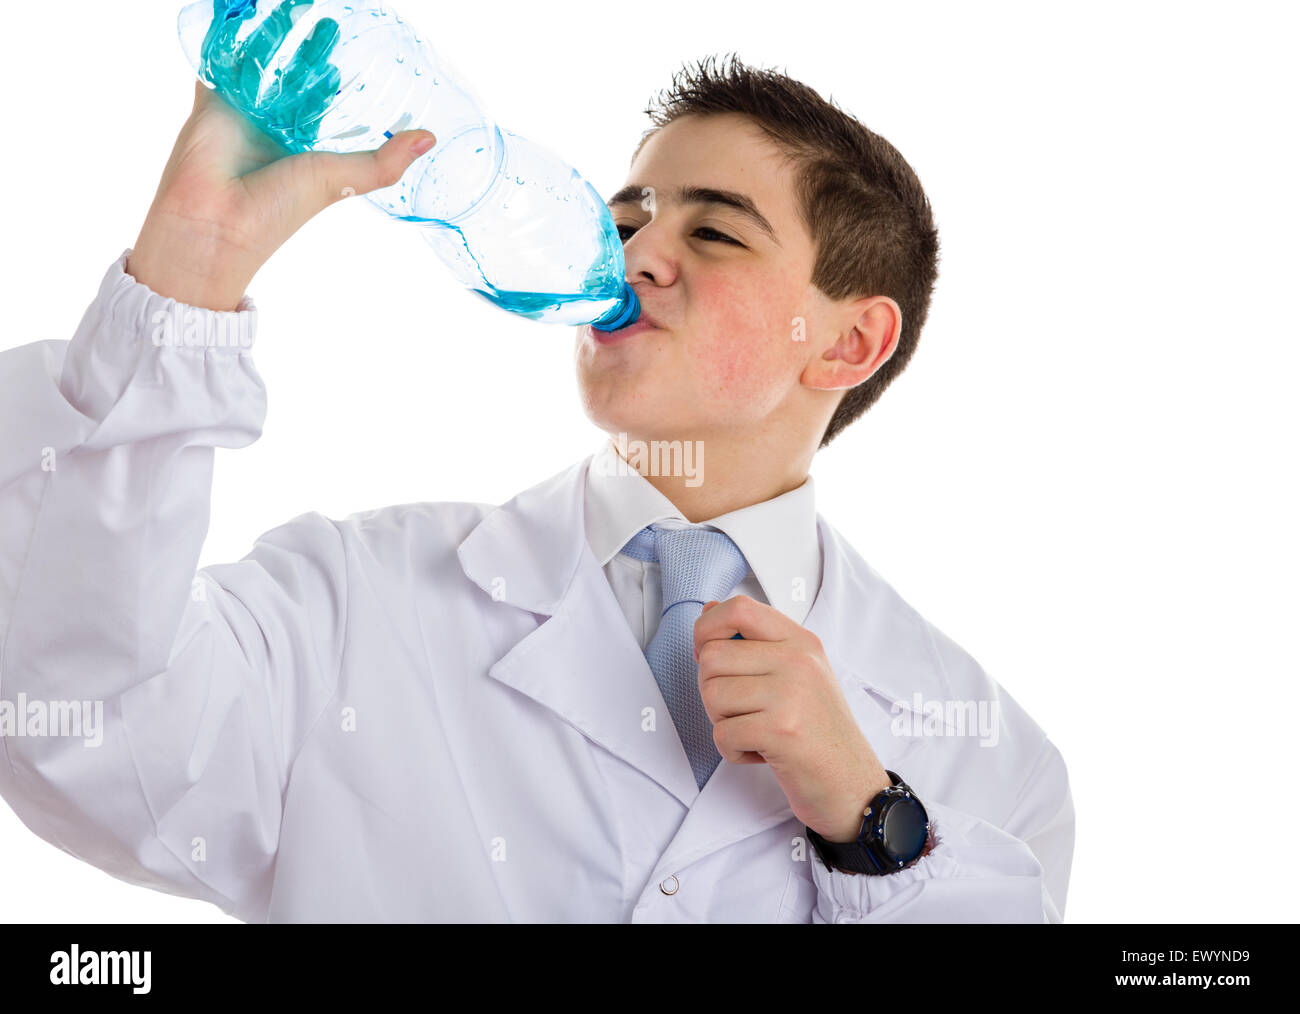 A boy doctor in blue tie and white coat with black digital watch drinking water from plastic bottle. His acne skin has not ben retouched Stock Photo